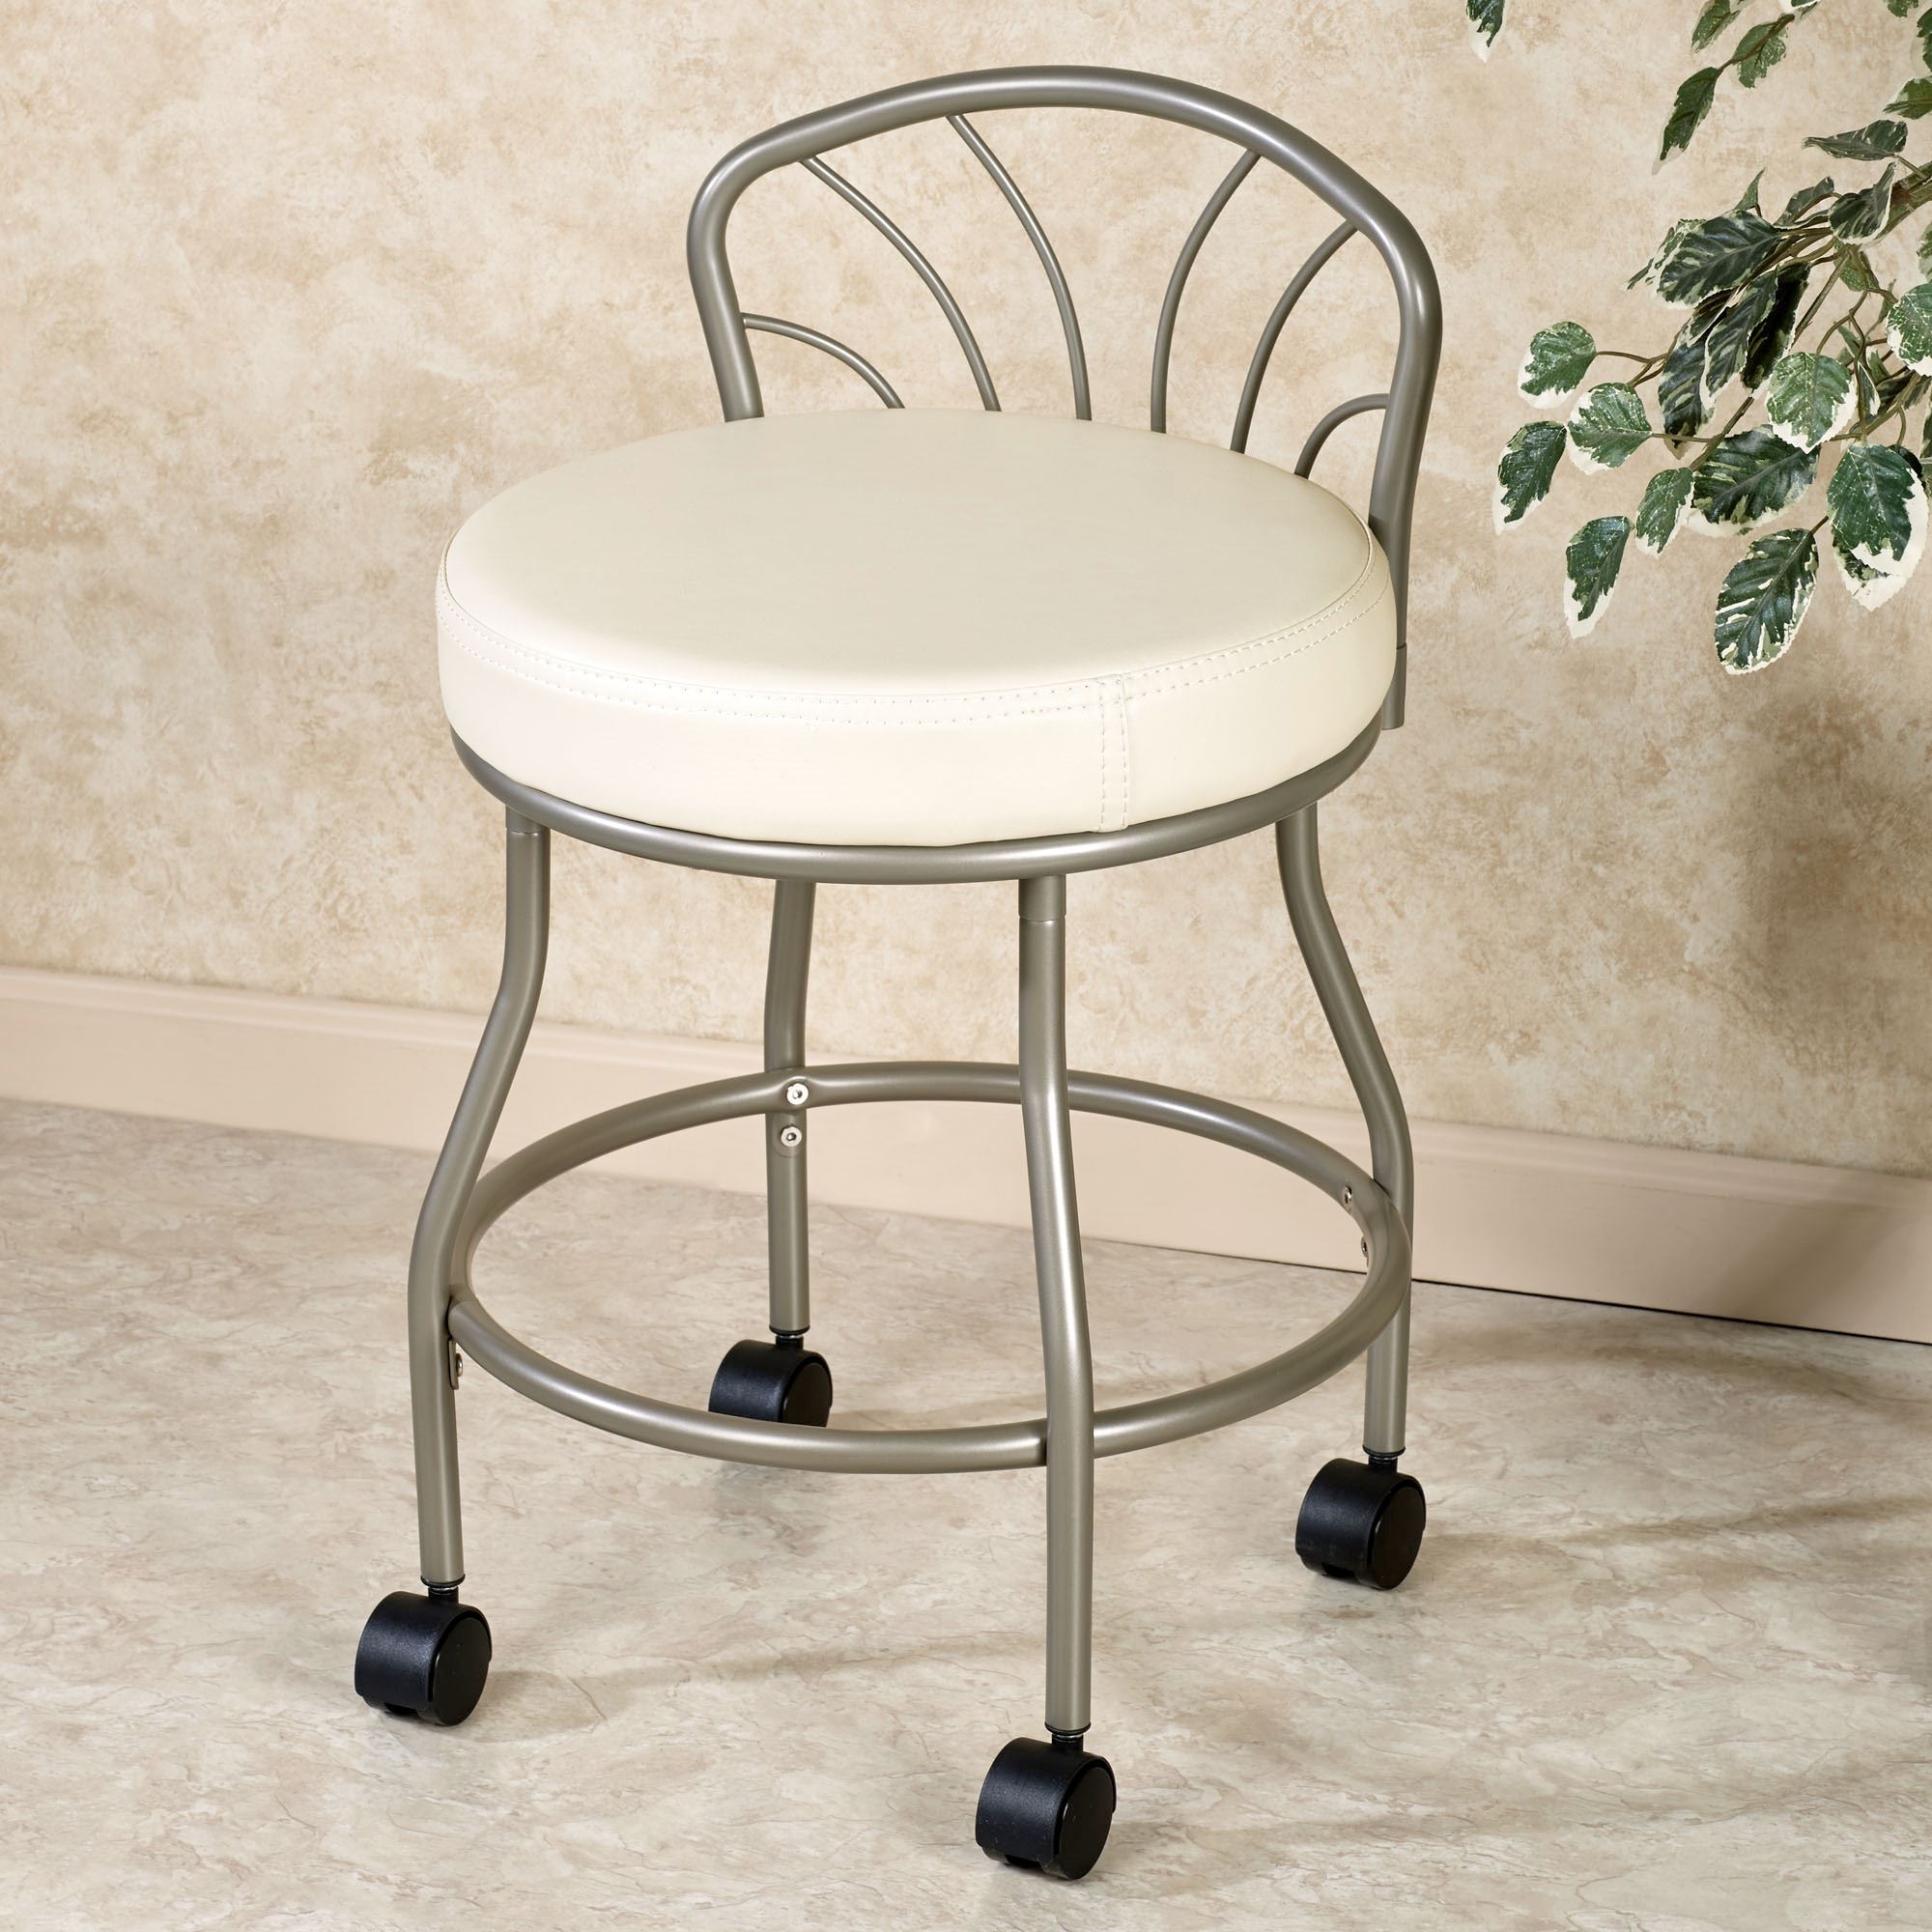 Vanity Chair With Wheels You Ll Love In, Makeup Vanity Chair With Wheels